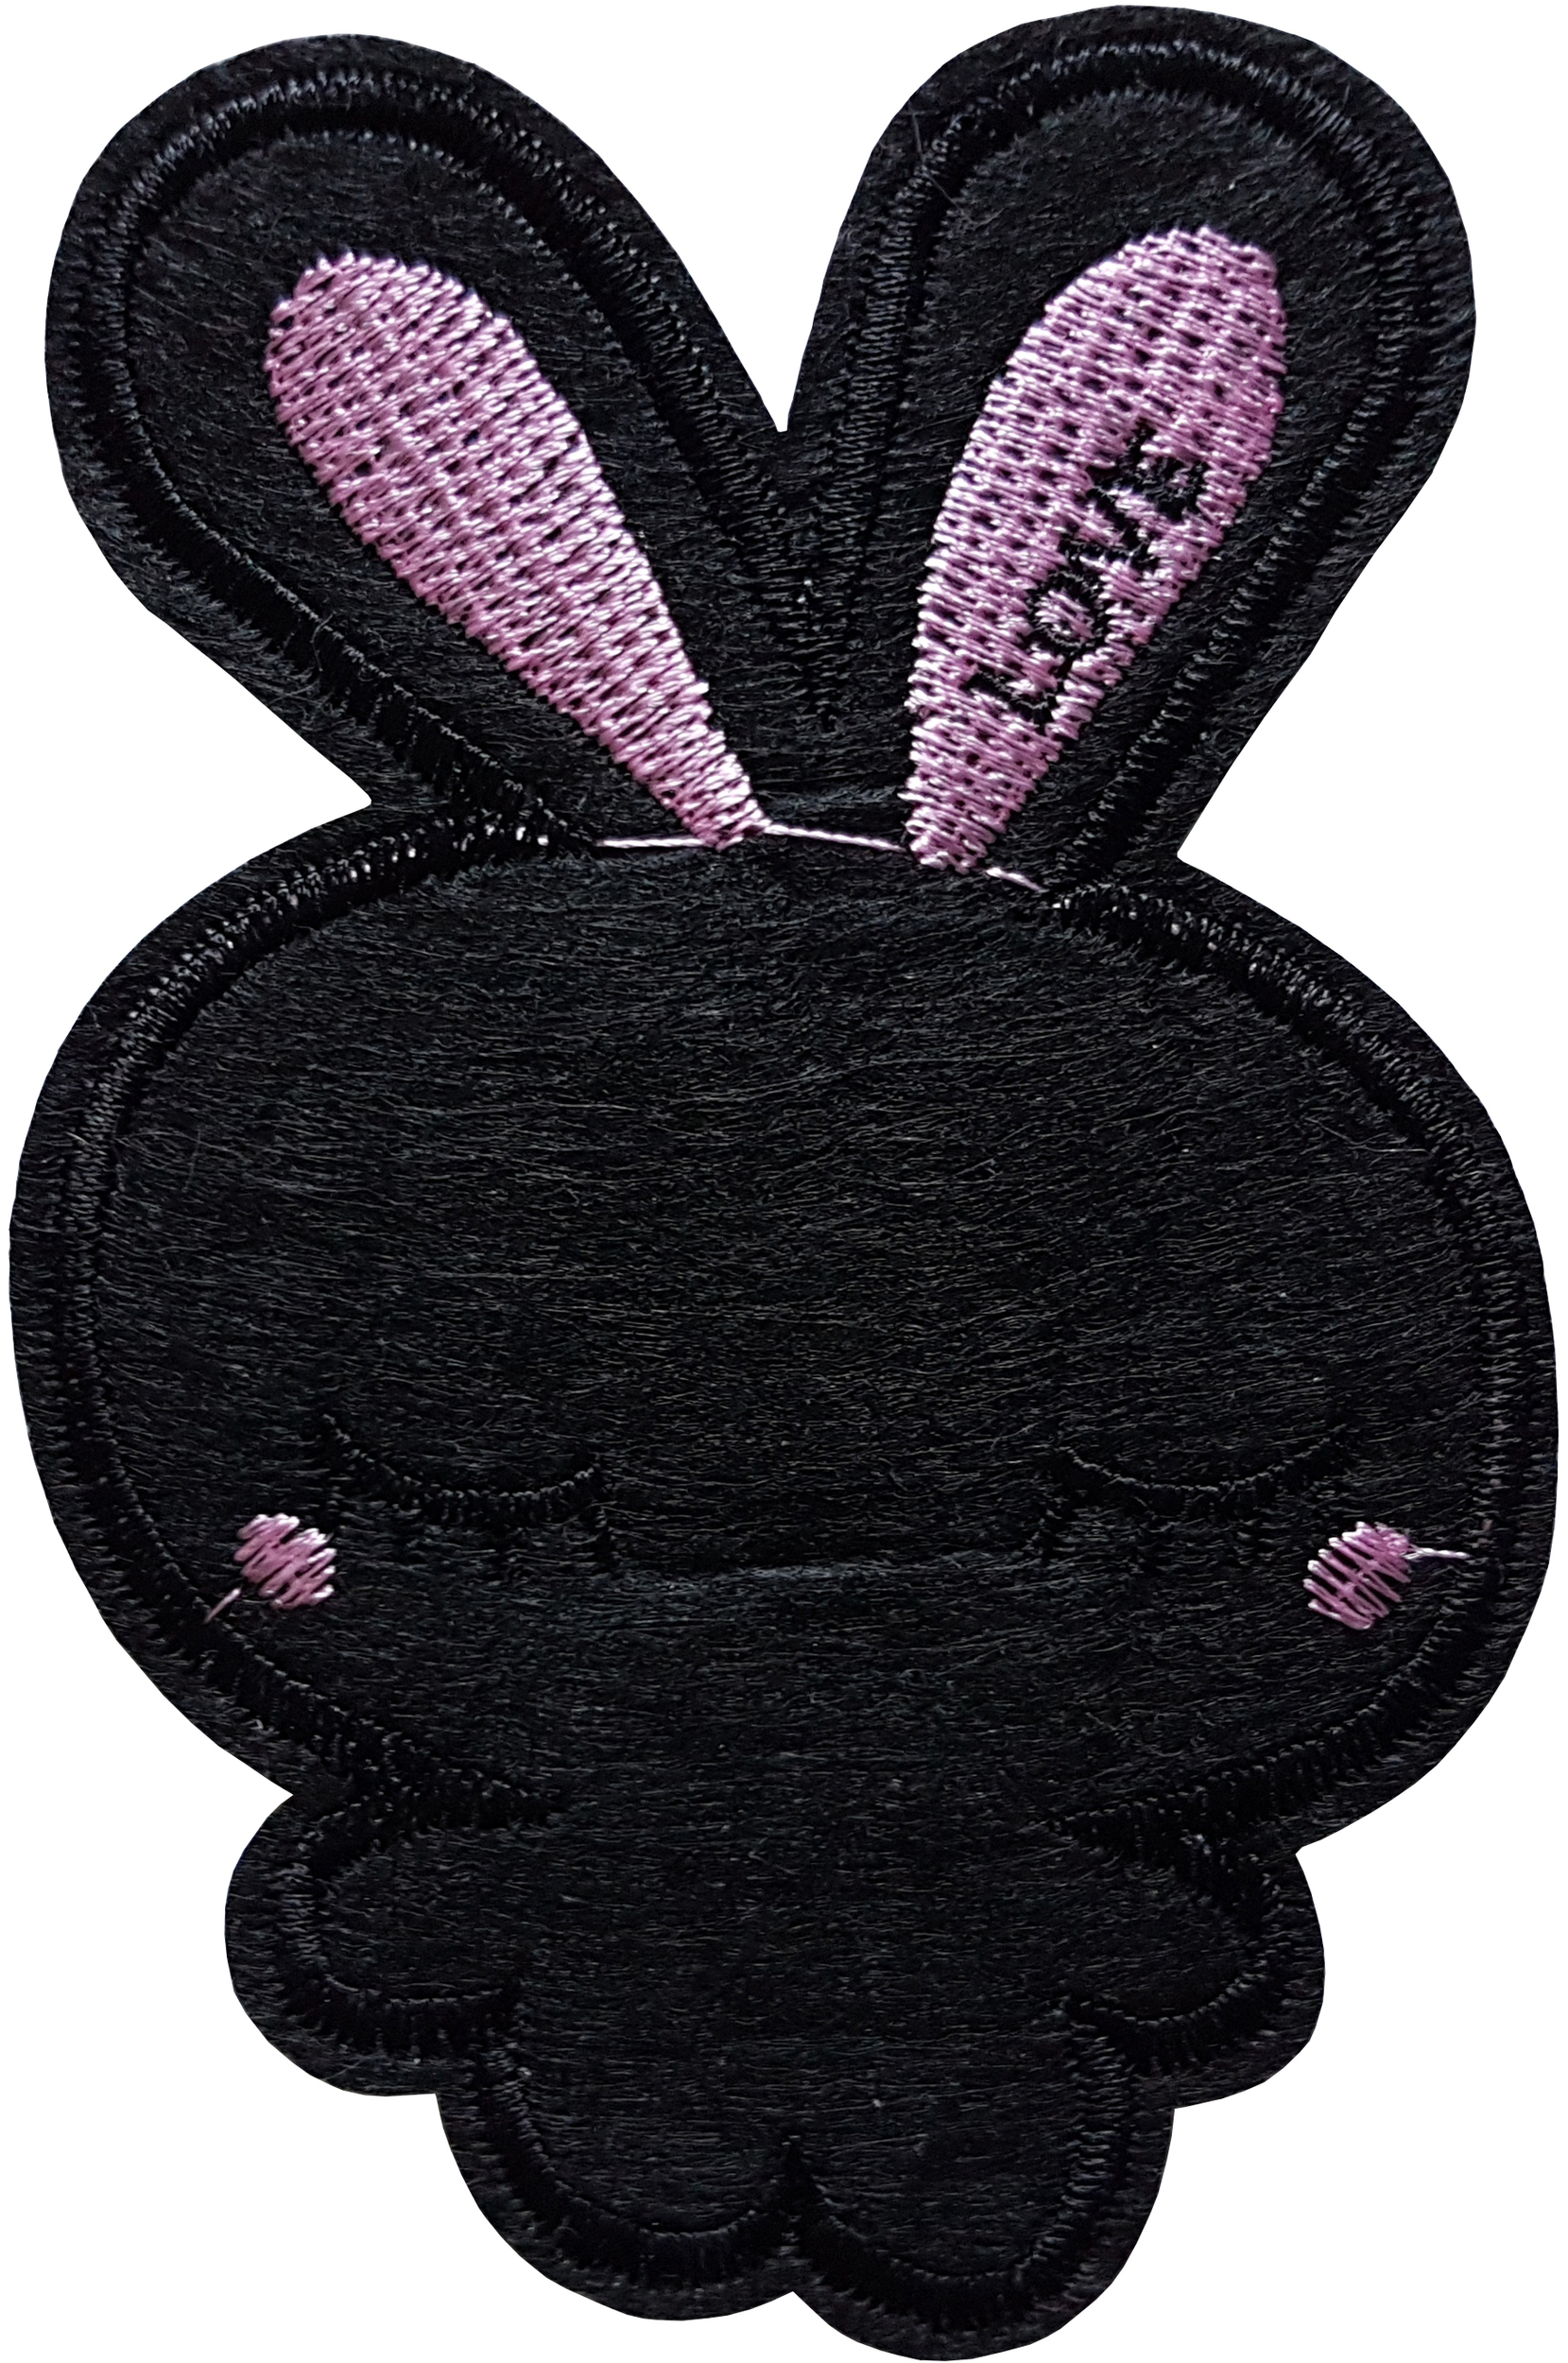 Patch Thermocollant Lapin Noir